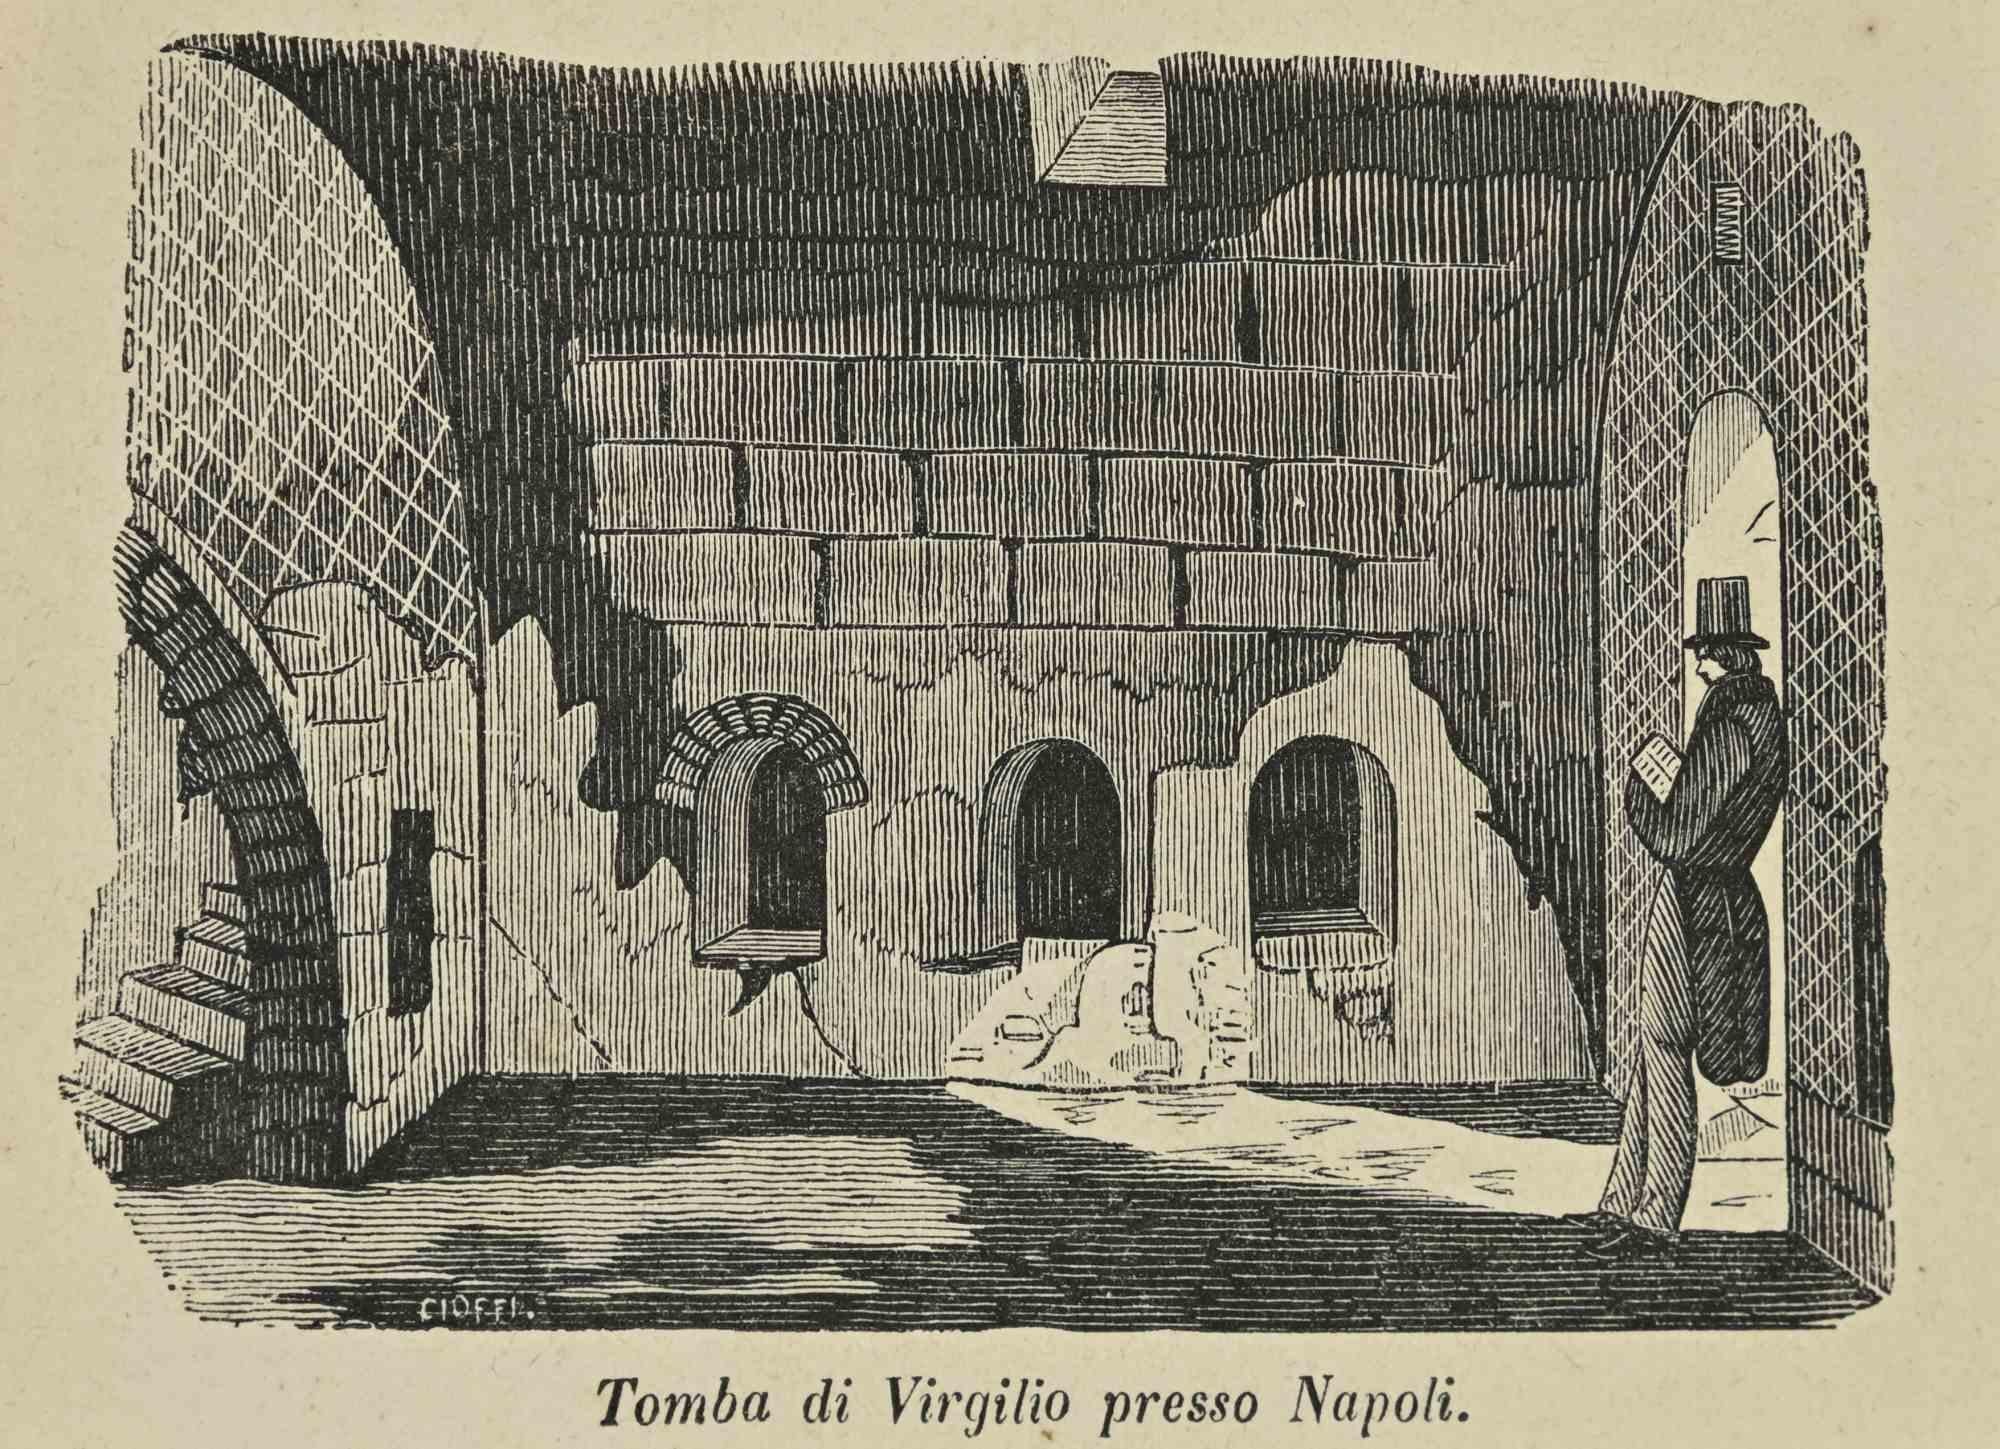 Uses and Customs - Virgil's Tomb in Naples - Lithograph - 1862